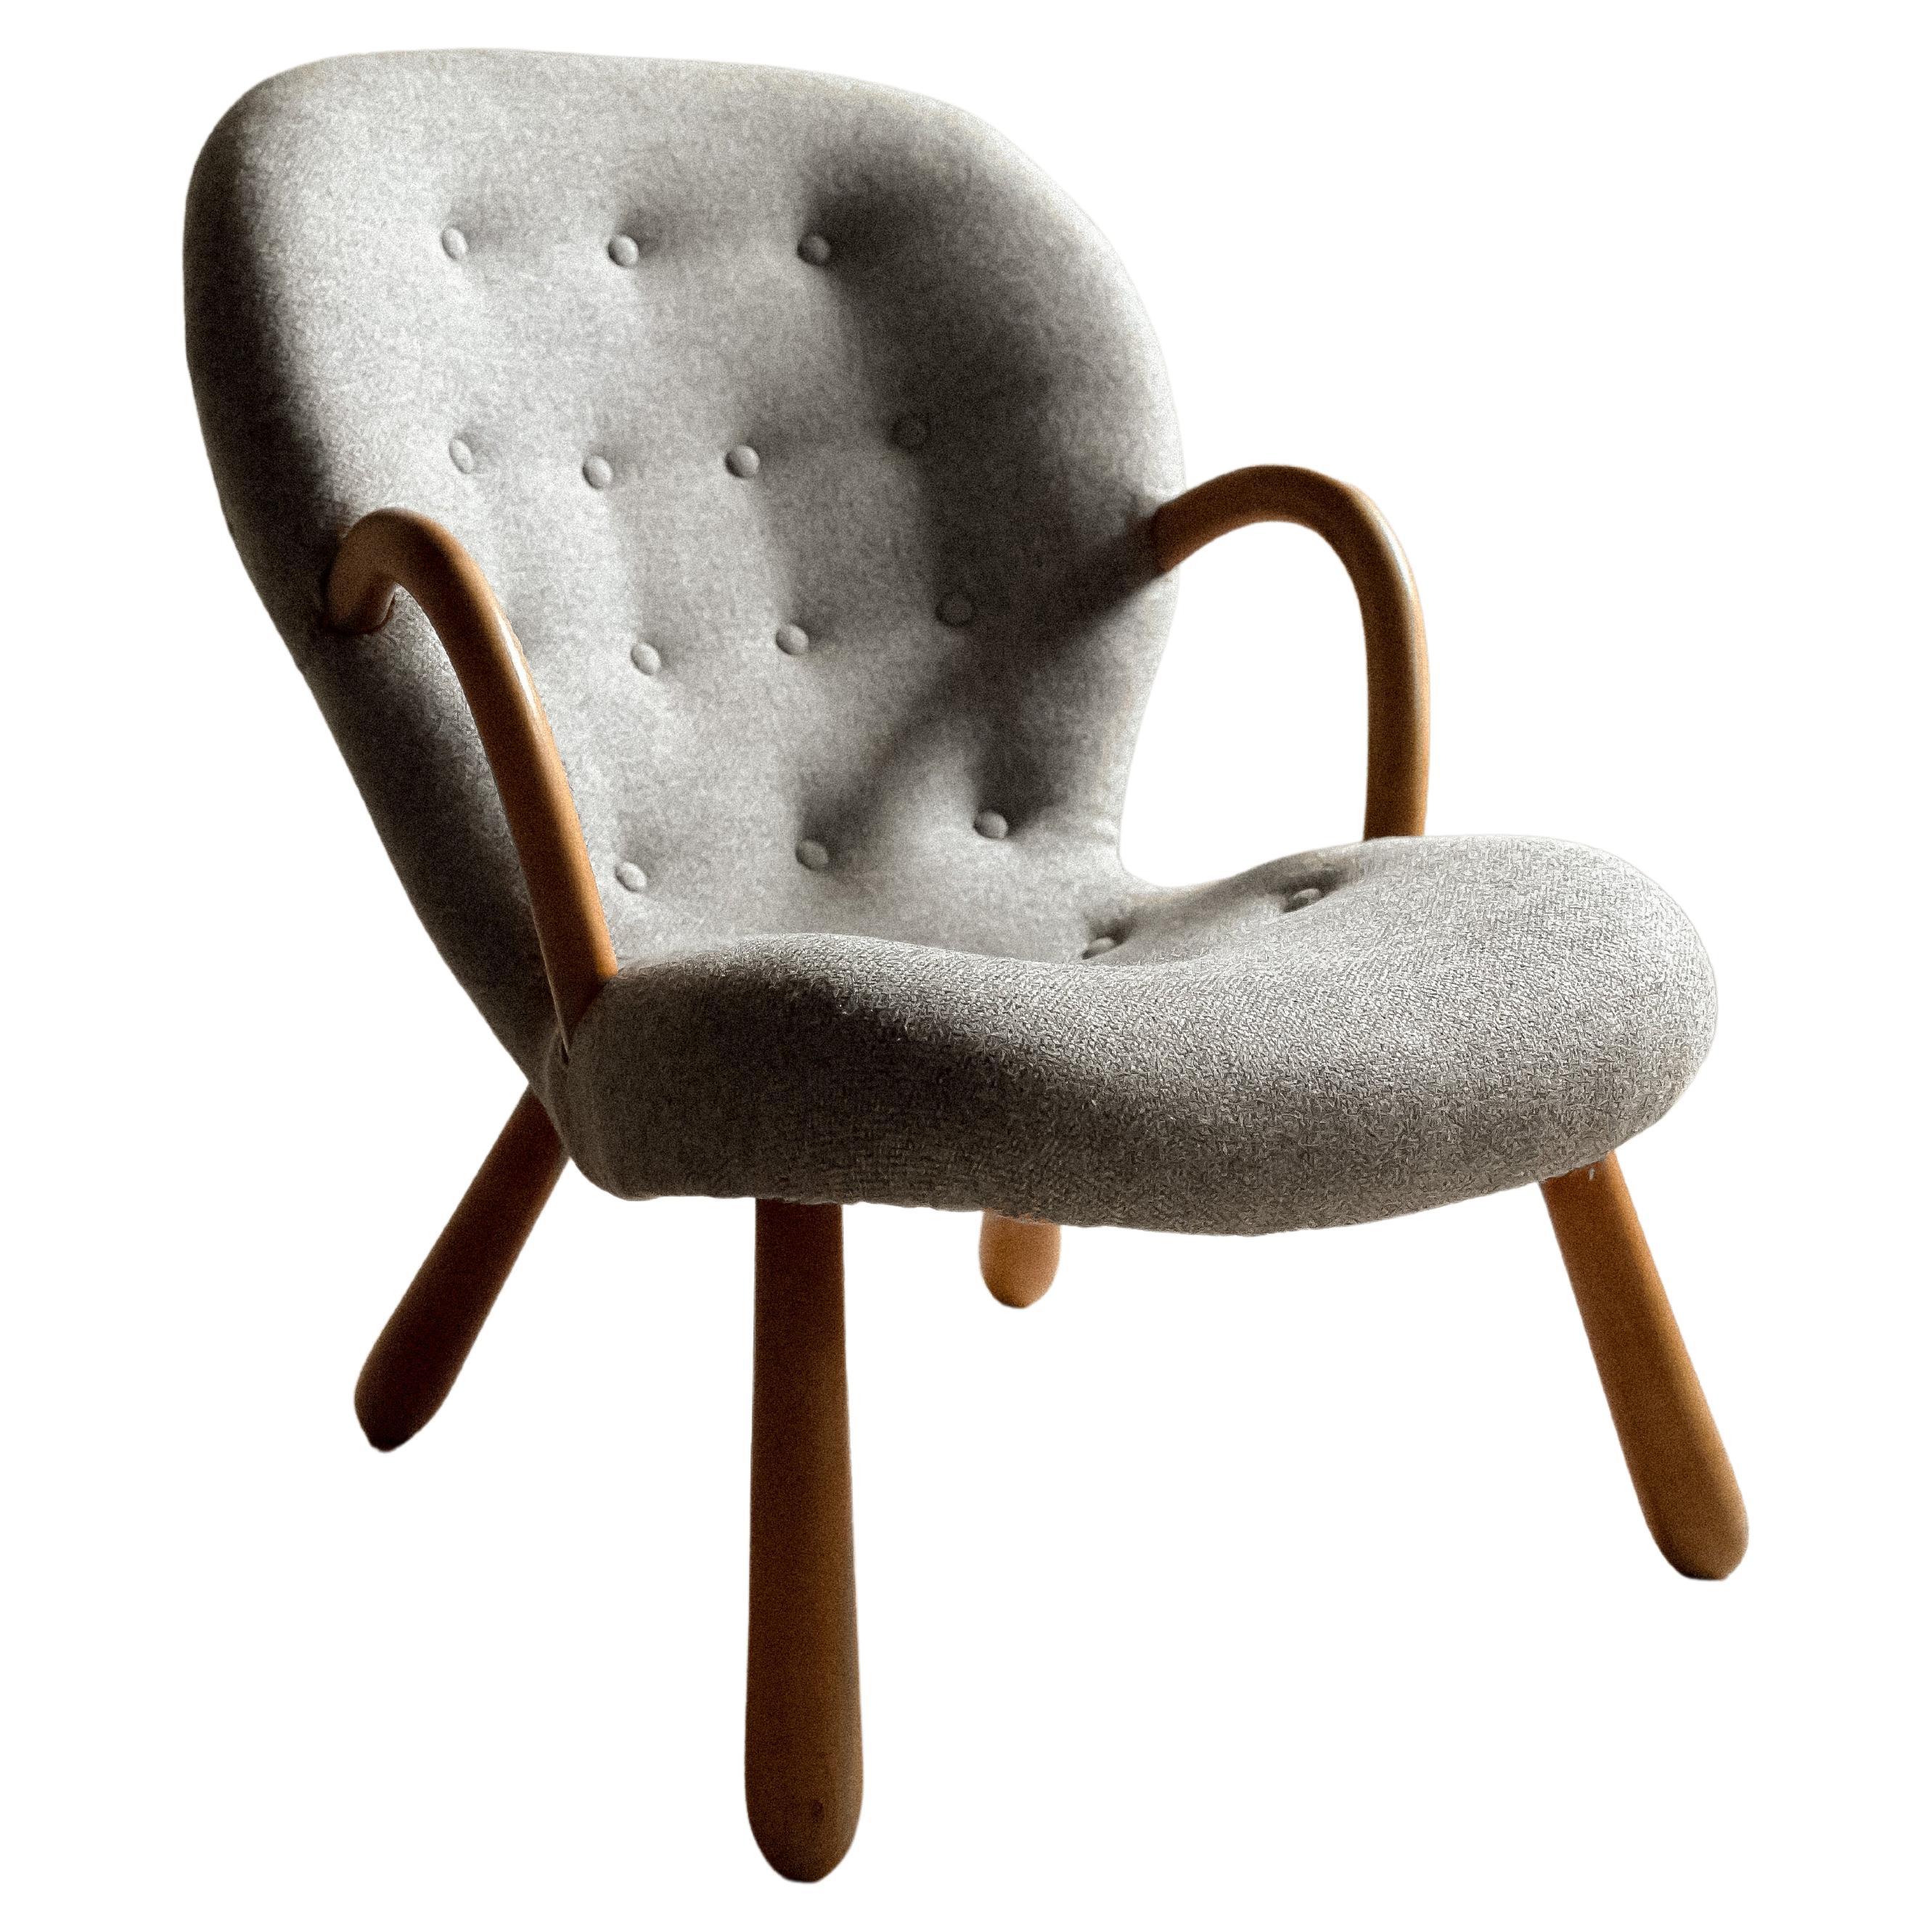 A Vintage Clam Chair, by Arnold Madsen for Vik & Blindheim, Norway 1953